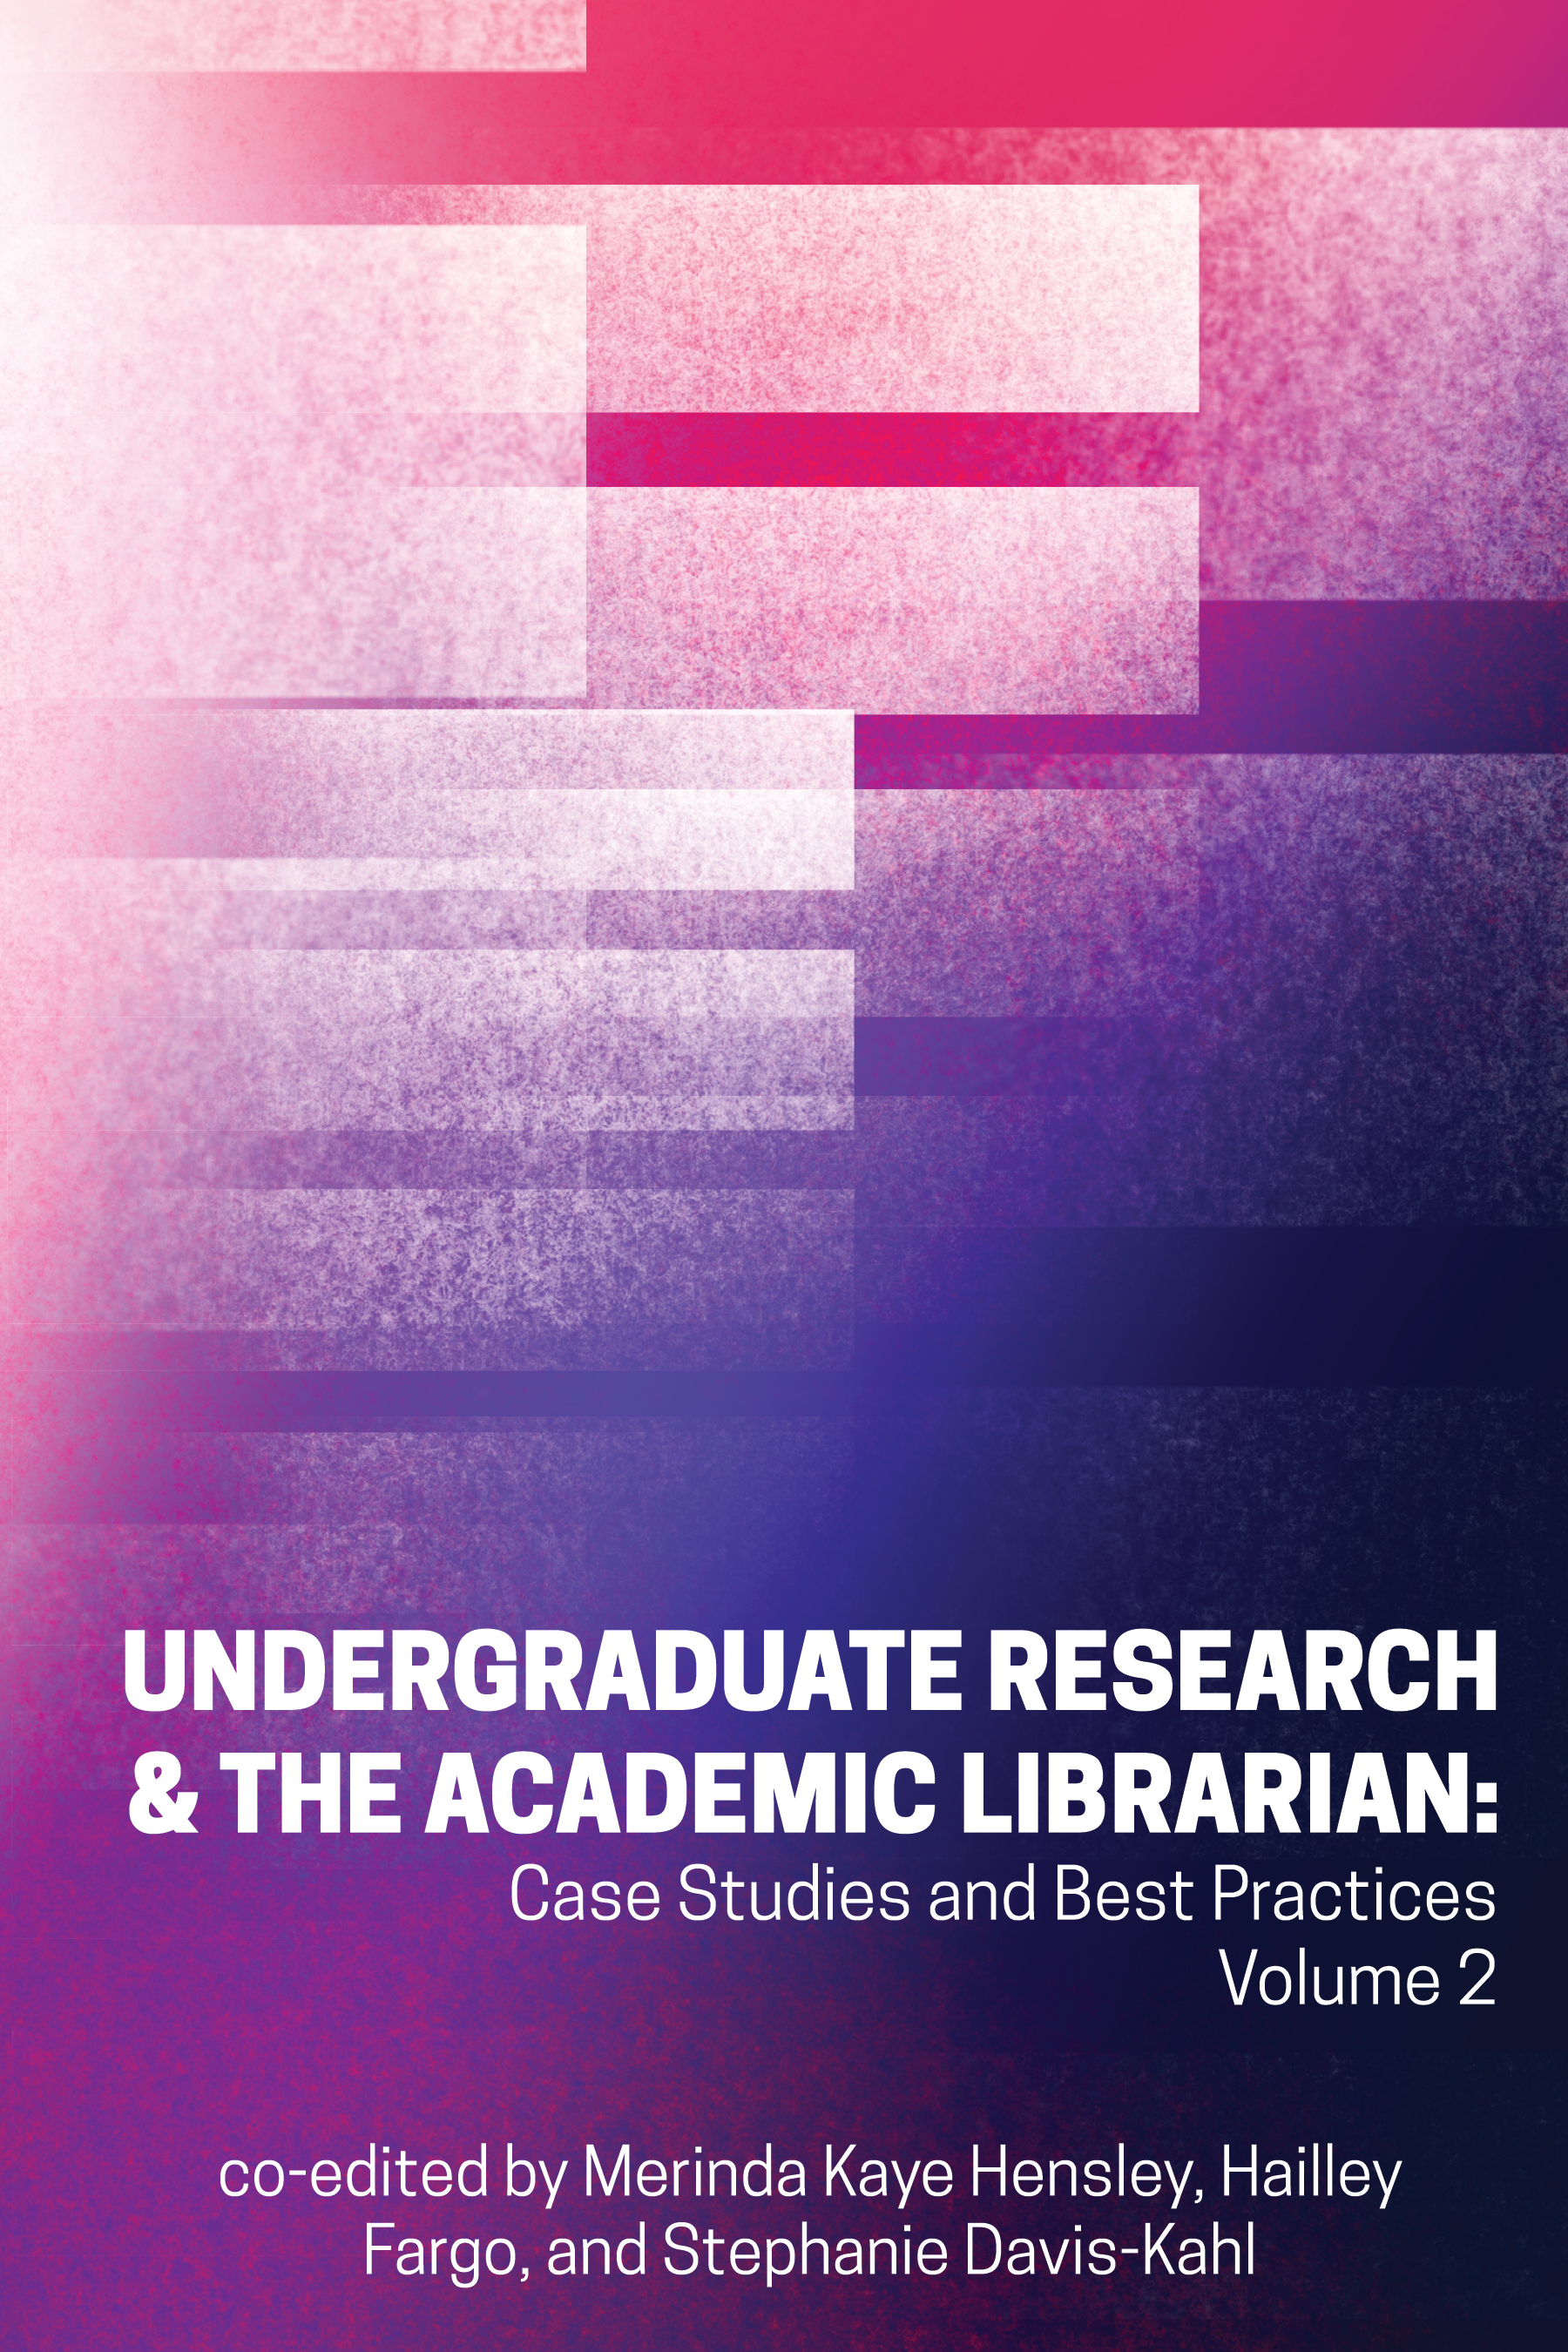 Undergraduate Research & the Academic Librarian